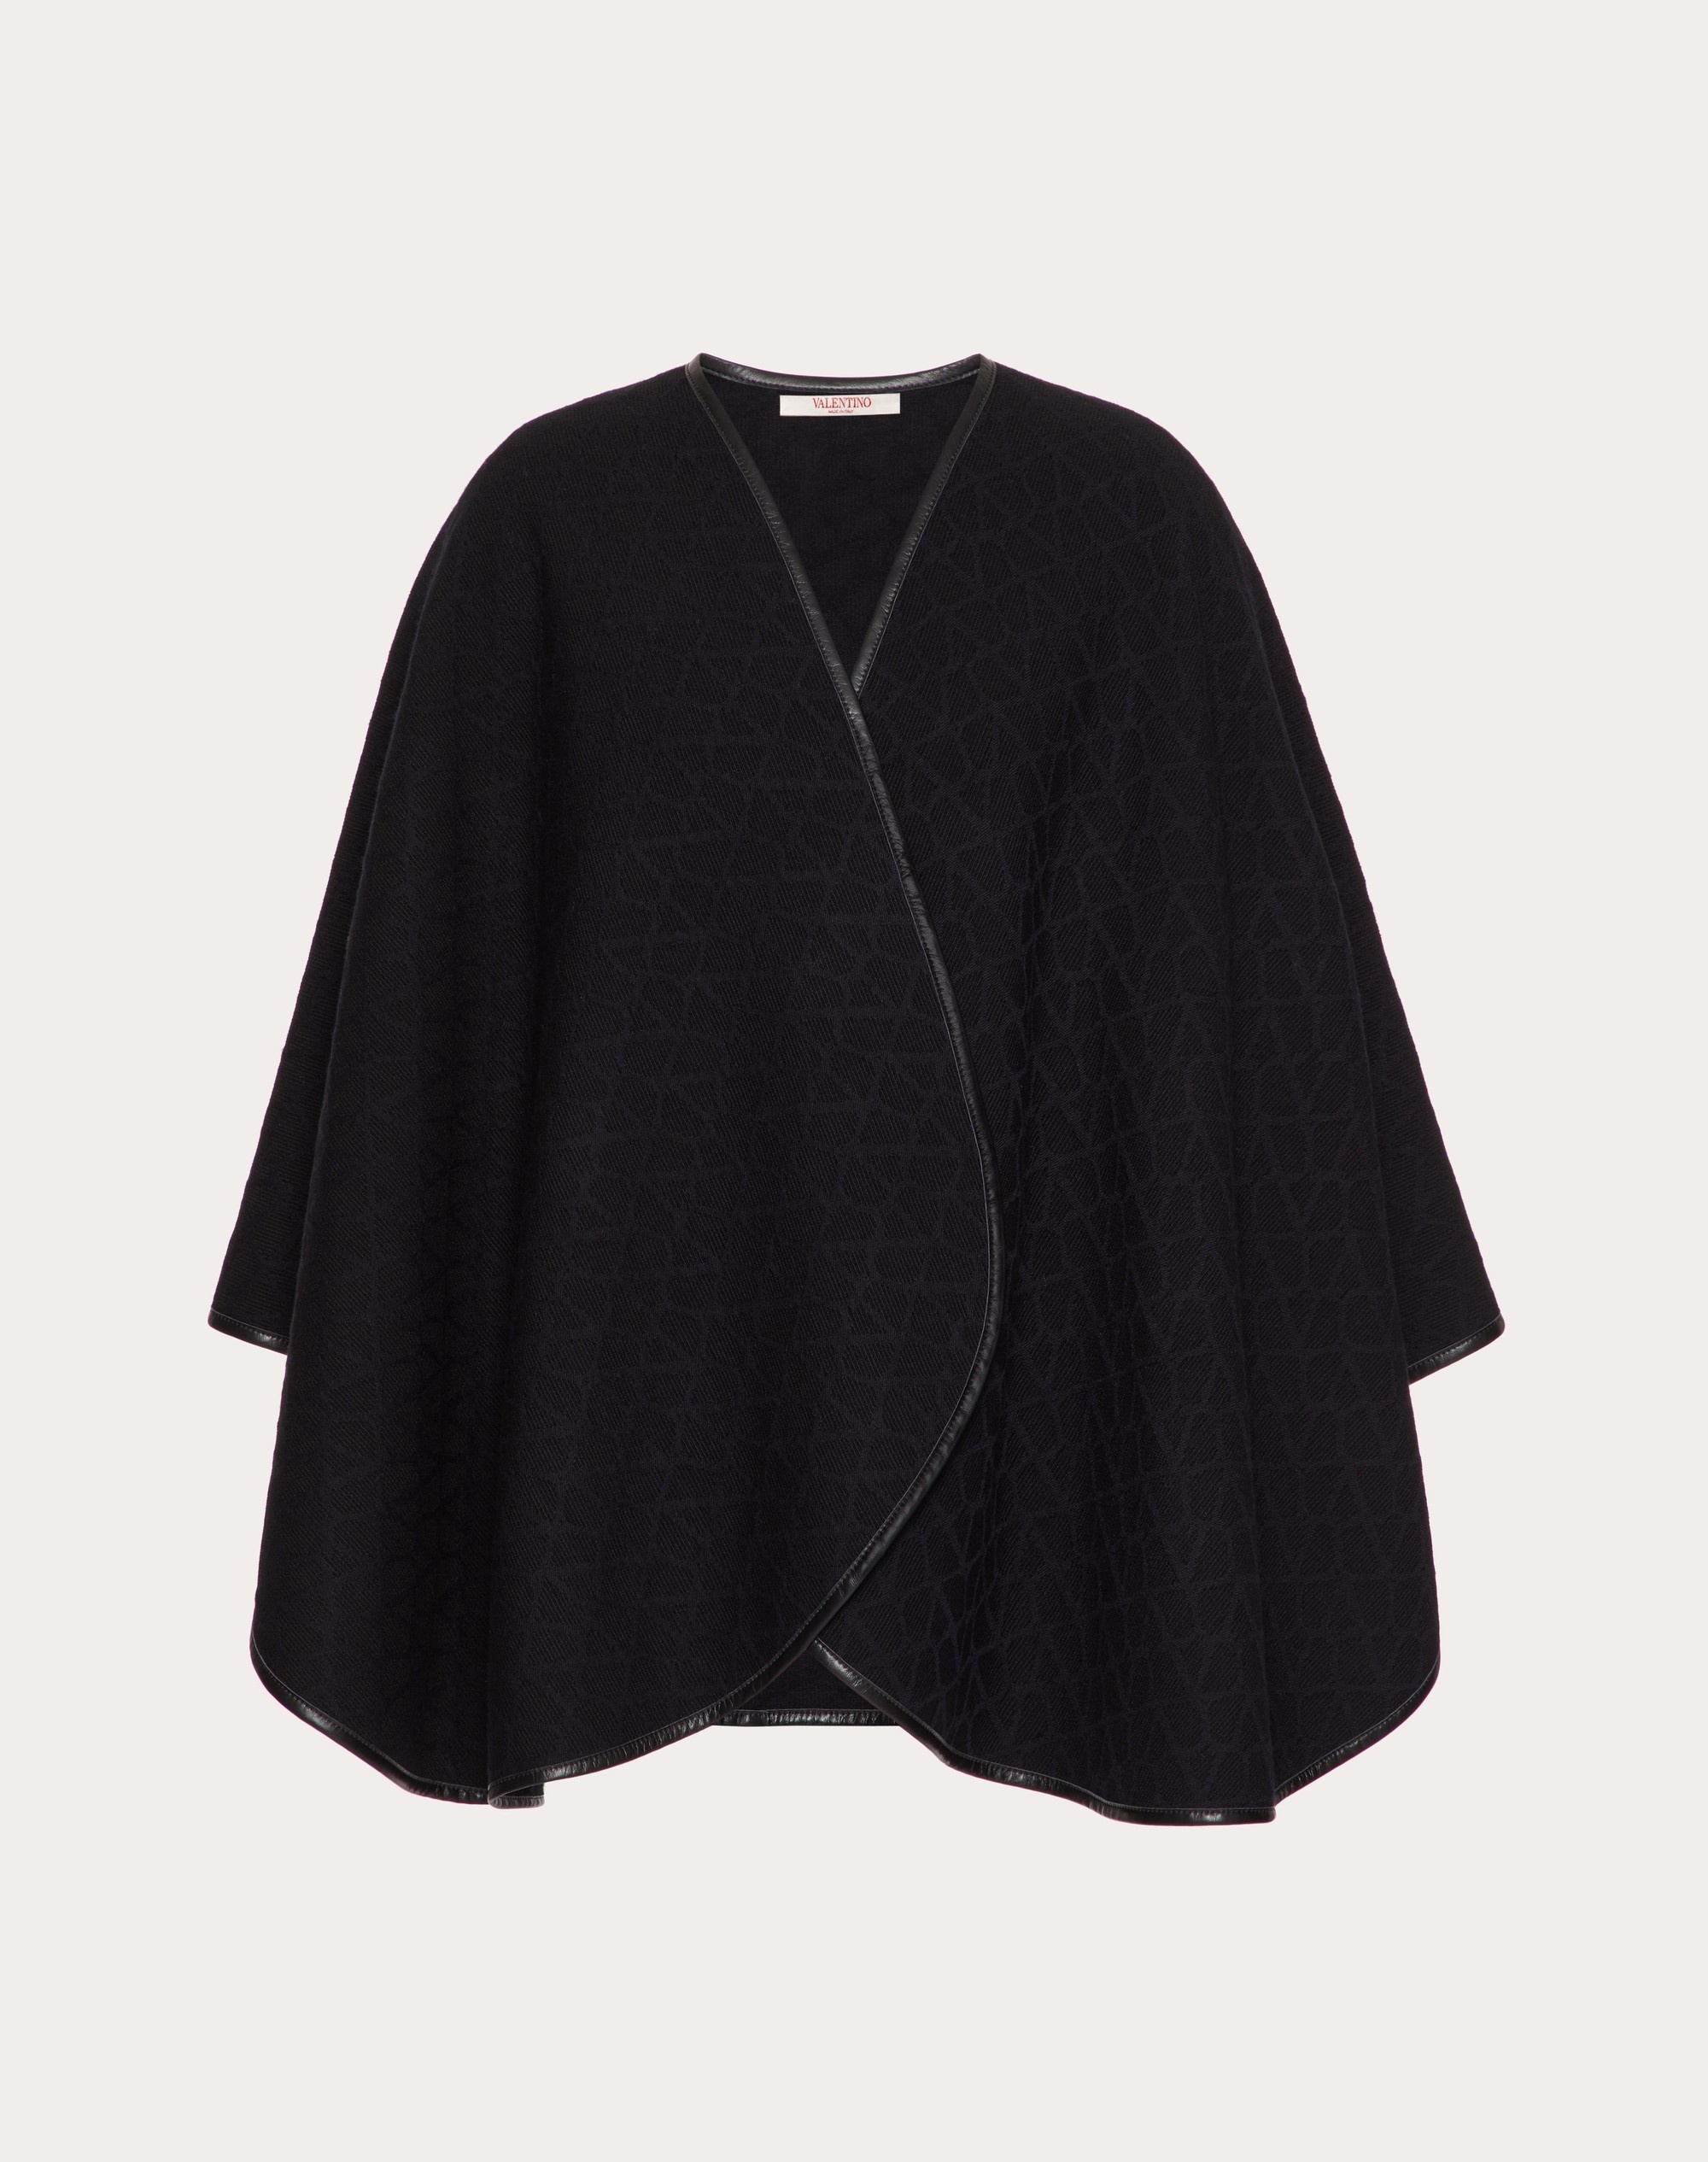 TOILE ICONOGRAPHE WOOL PONCHO WITH LEATHER TRIM - 1